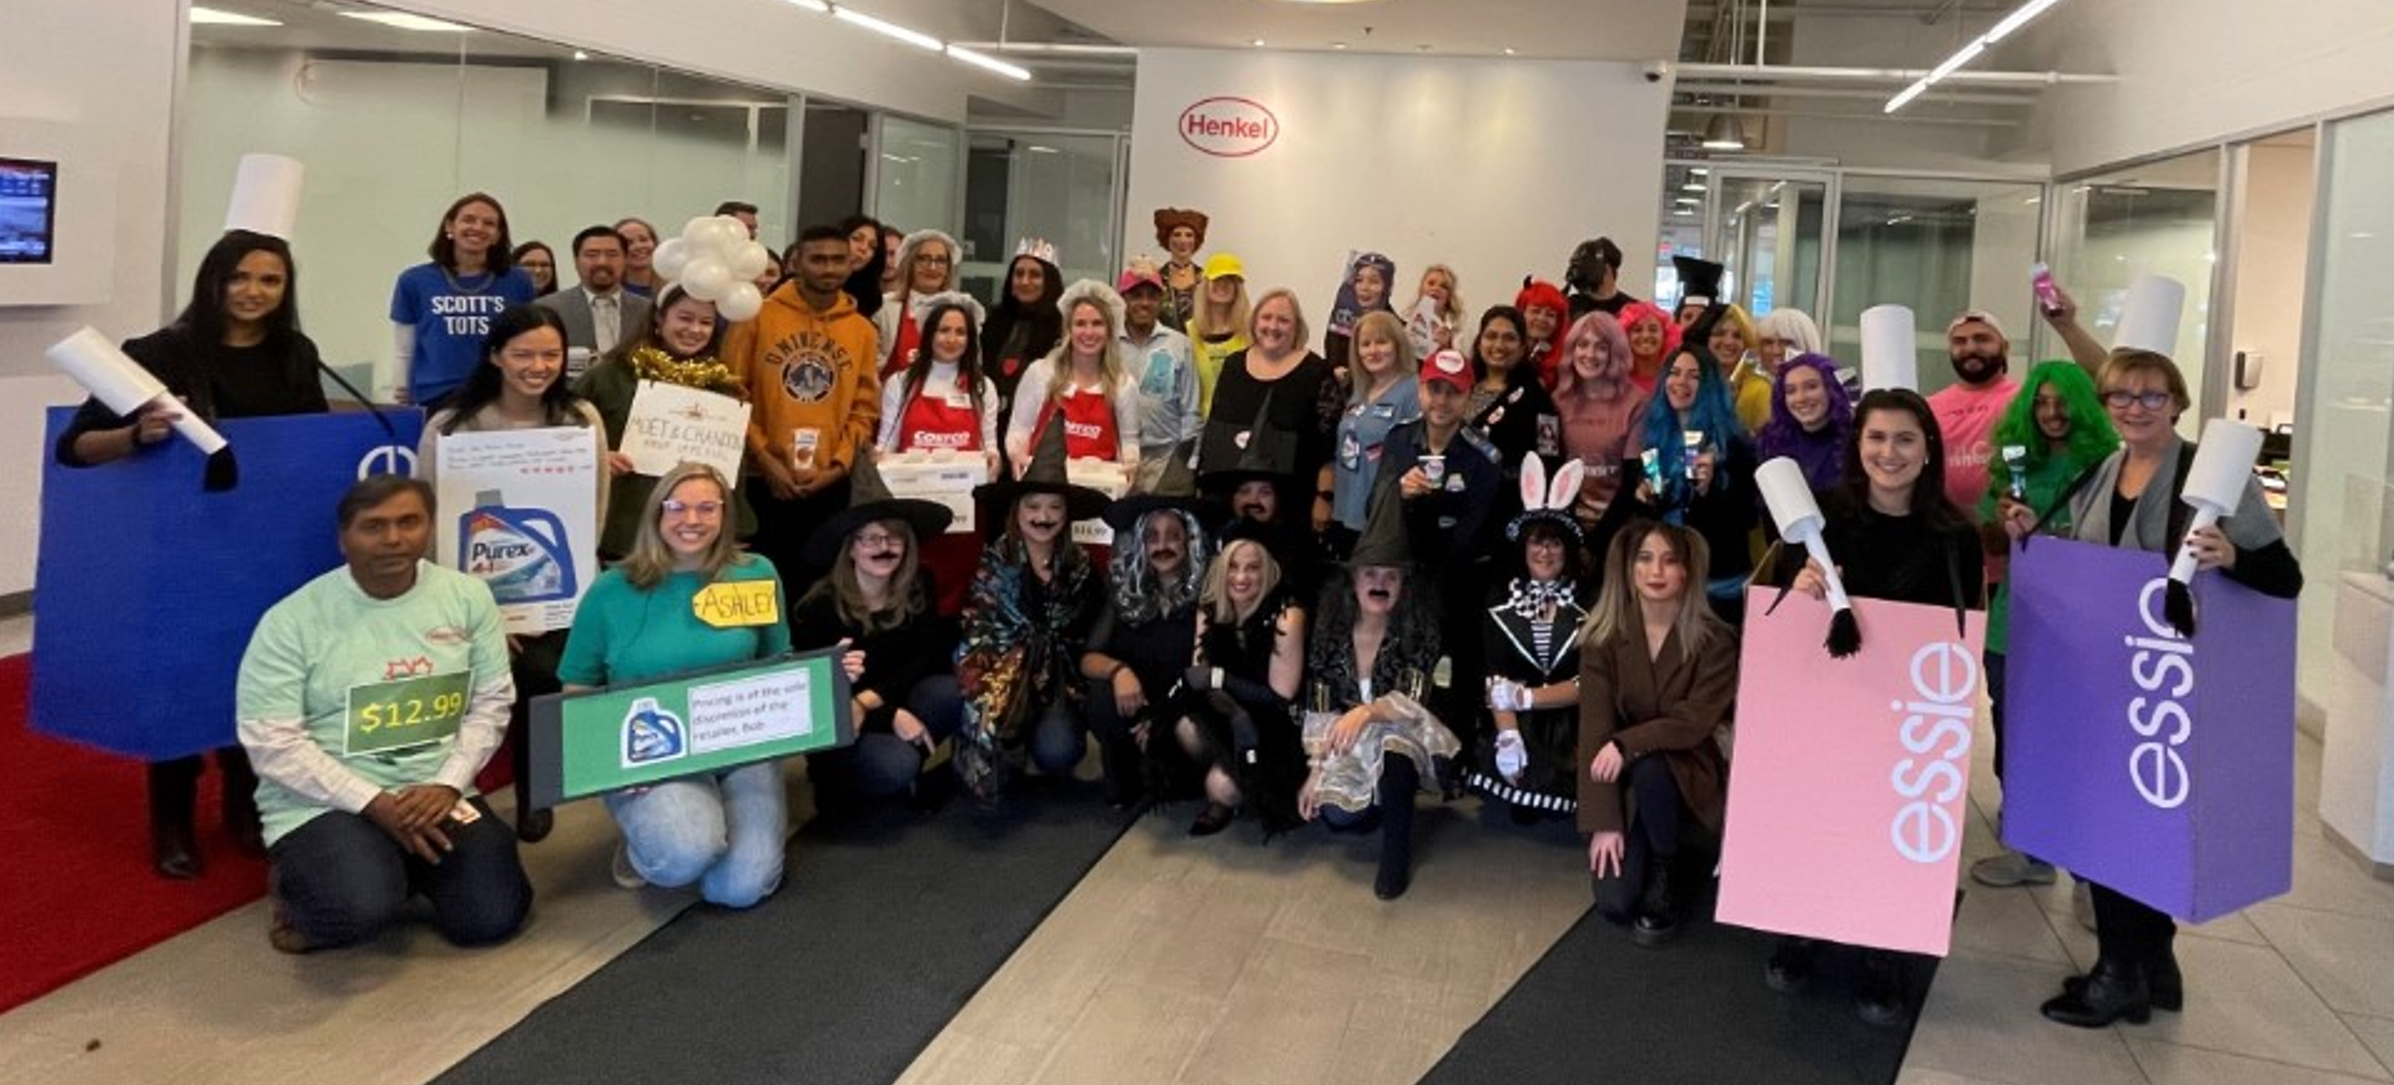 Large group of Henkel employees and co-op students dressed up in halloween costumes